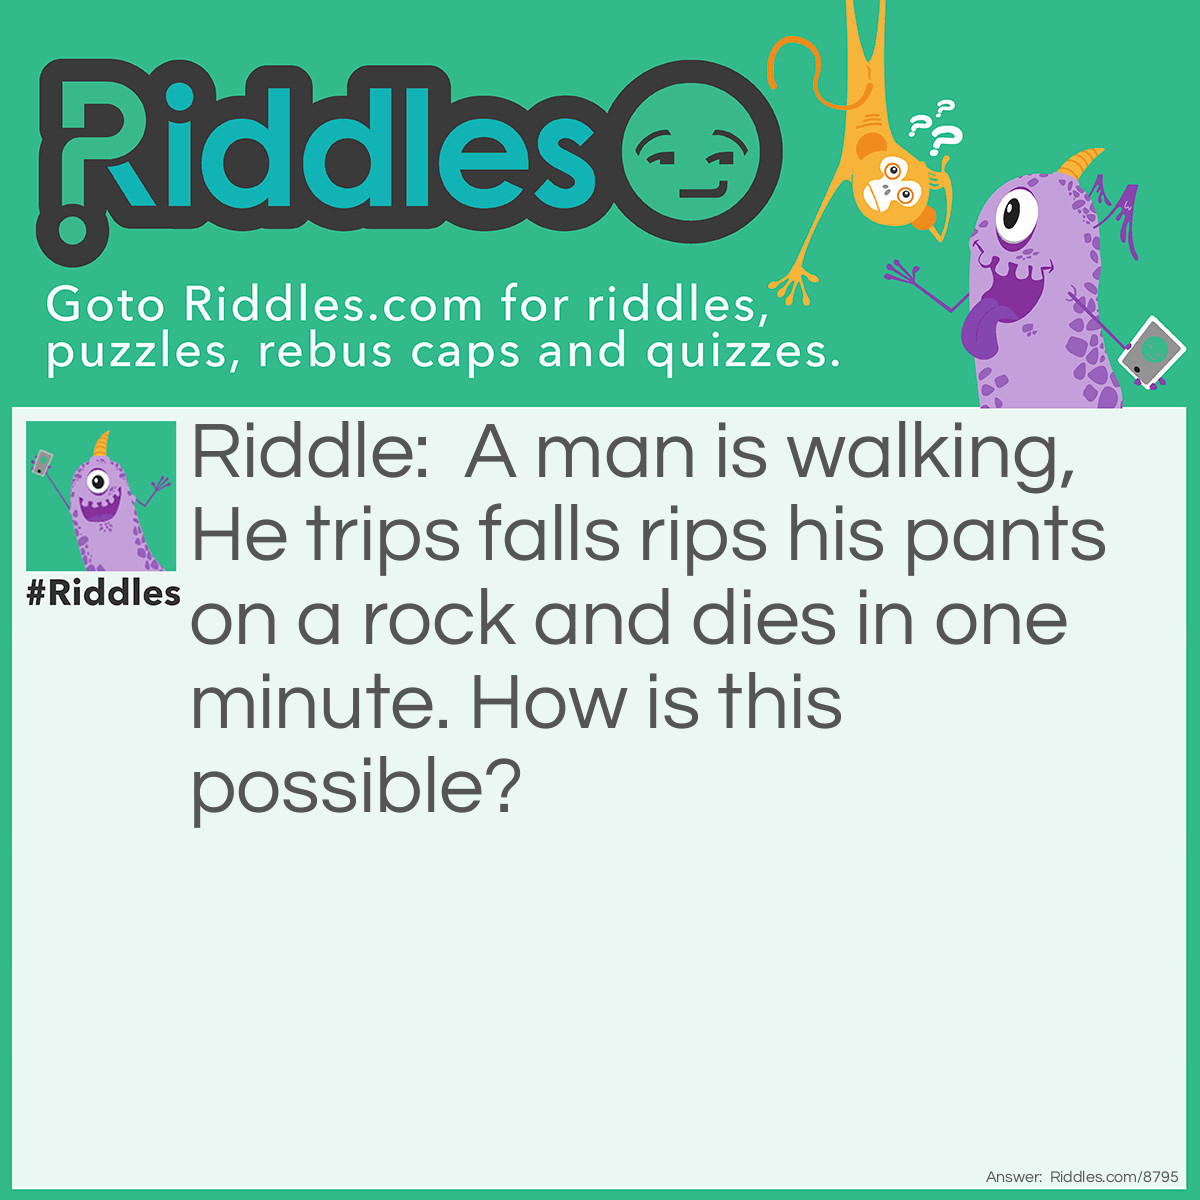 Riddle: A man is walking, He trips falls rips his pants on a rock and dies in one minute. How is this possible? Answer: He was in space!